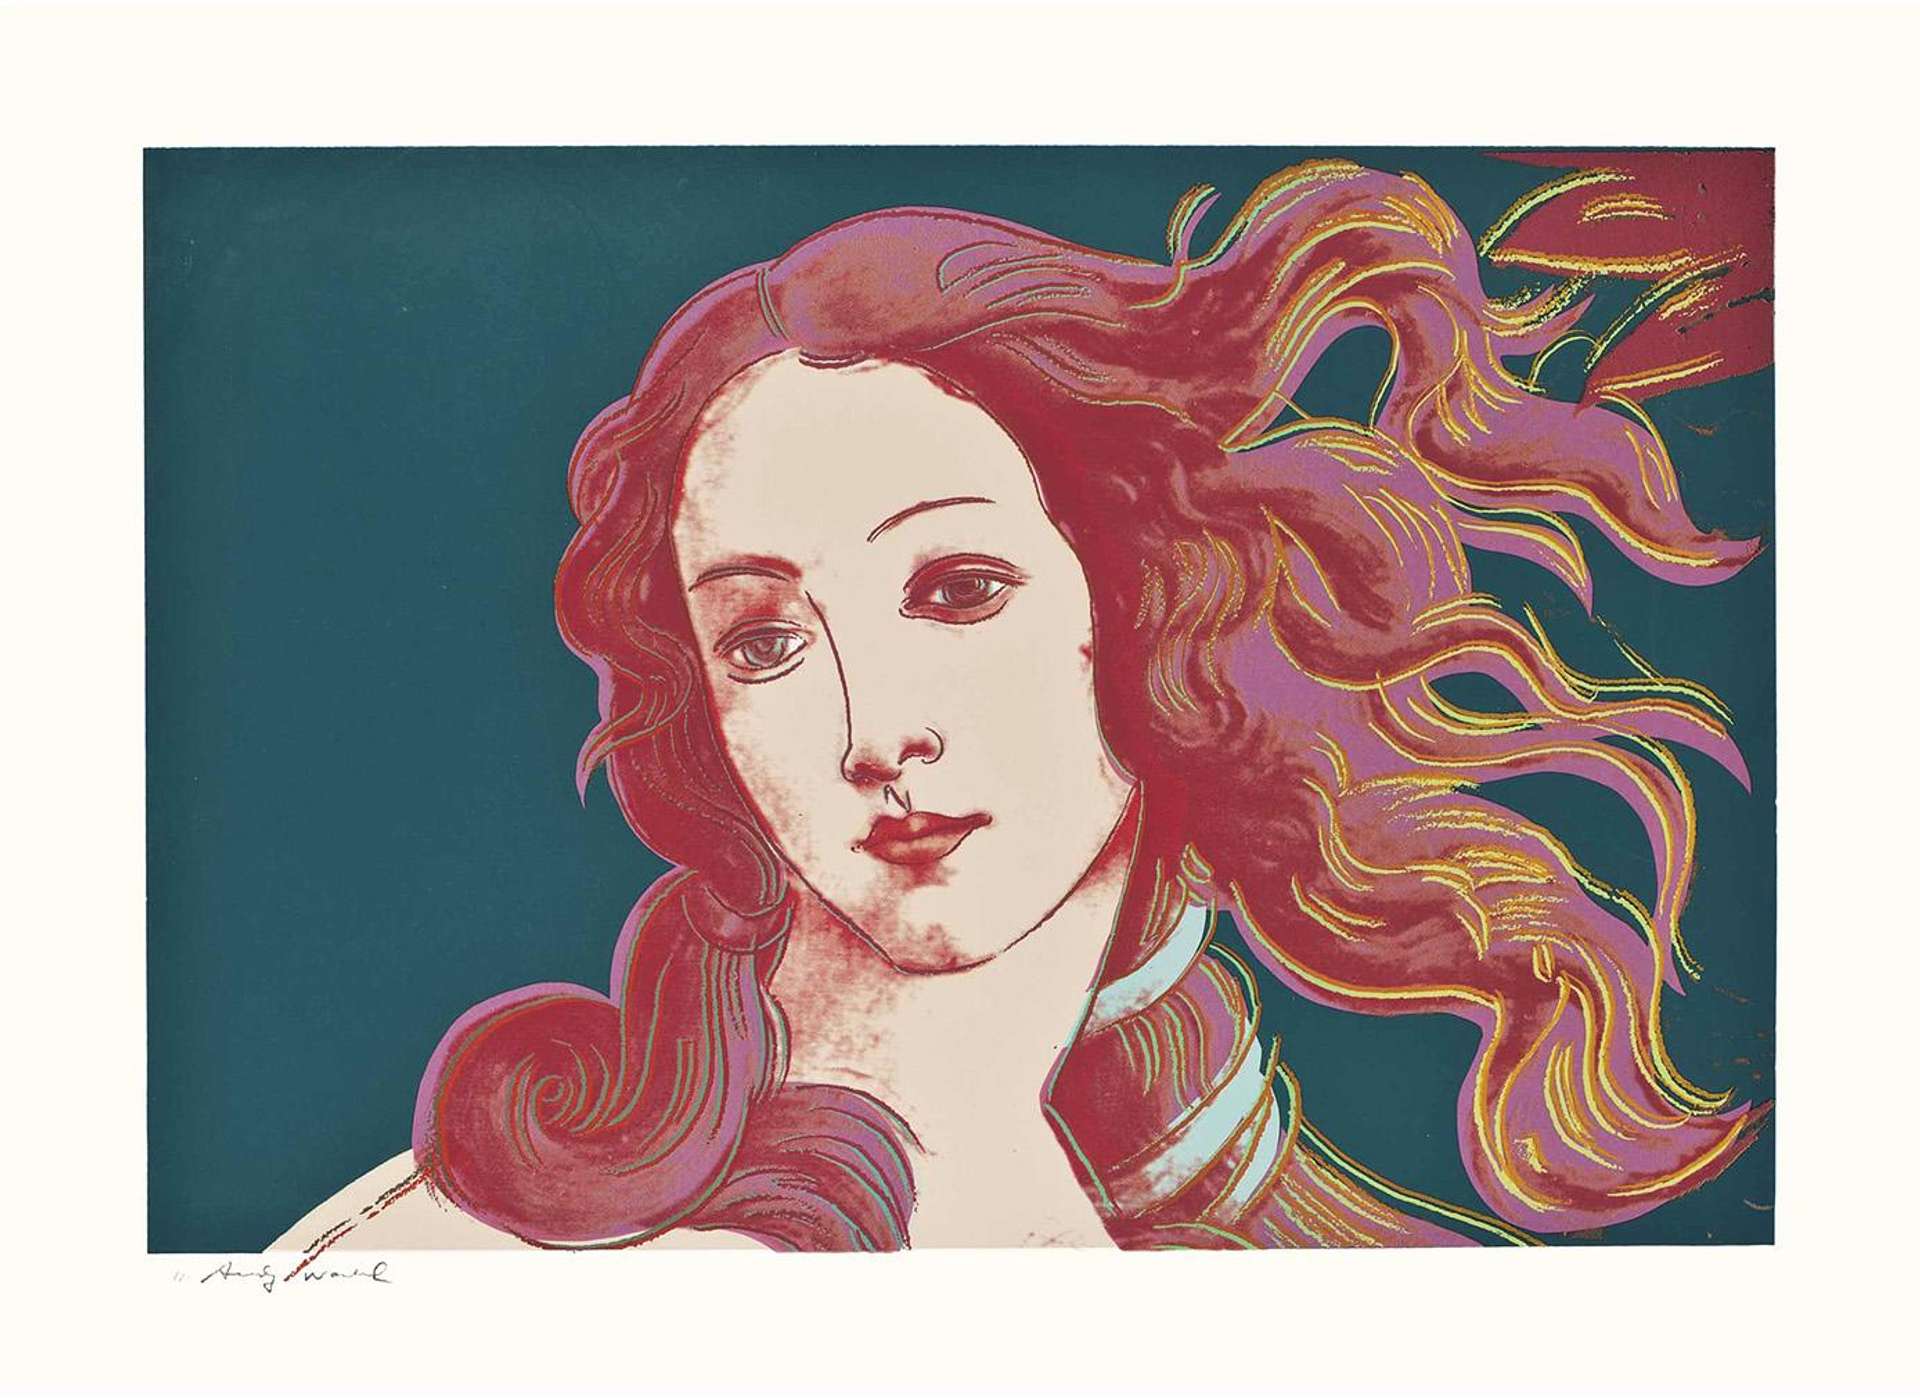 Andy Warhol’s Details Of Renaissance Paintings (Sandro Botticelli, Birth Of Venus, 1482) (F. & S. II.316), a Pop Art style close-up image of a woman with her red-coloured hair flowing in the wind against a teal background